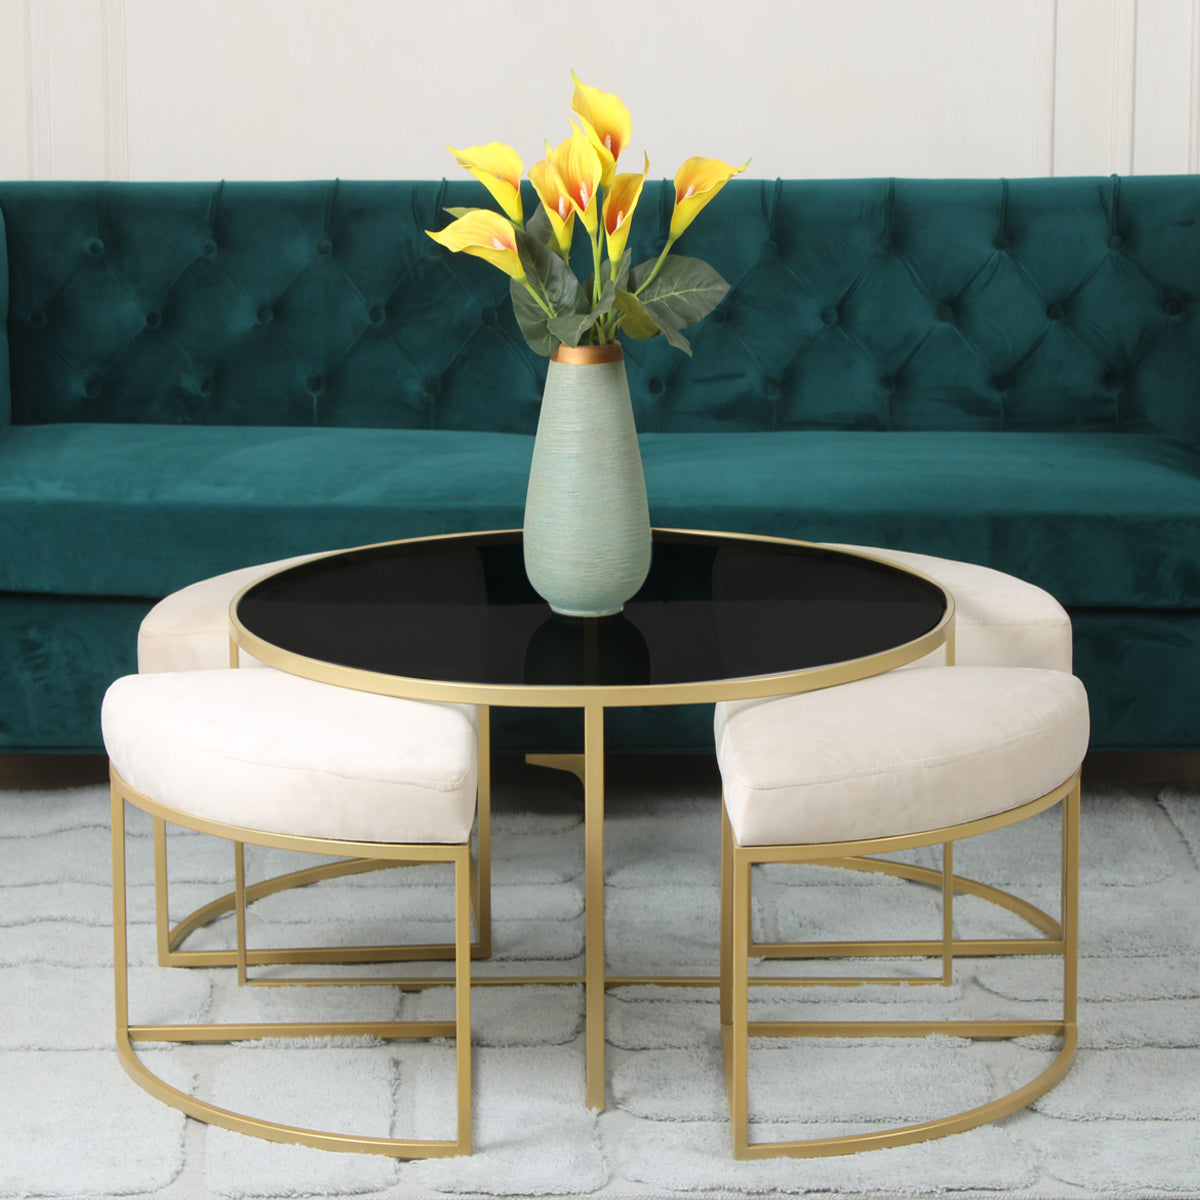 Cassel Nesting Black Glass Coffee Table Set With 4 Stools In Gold Finish